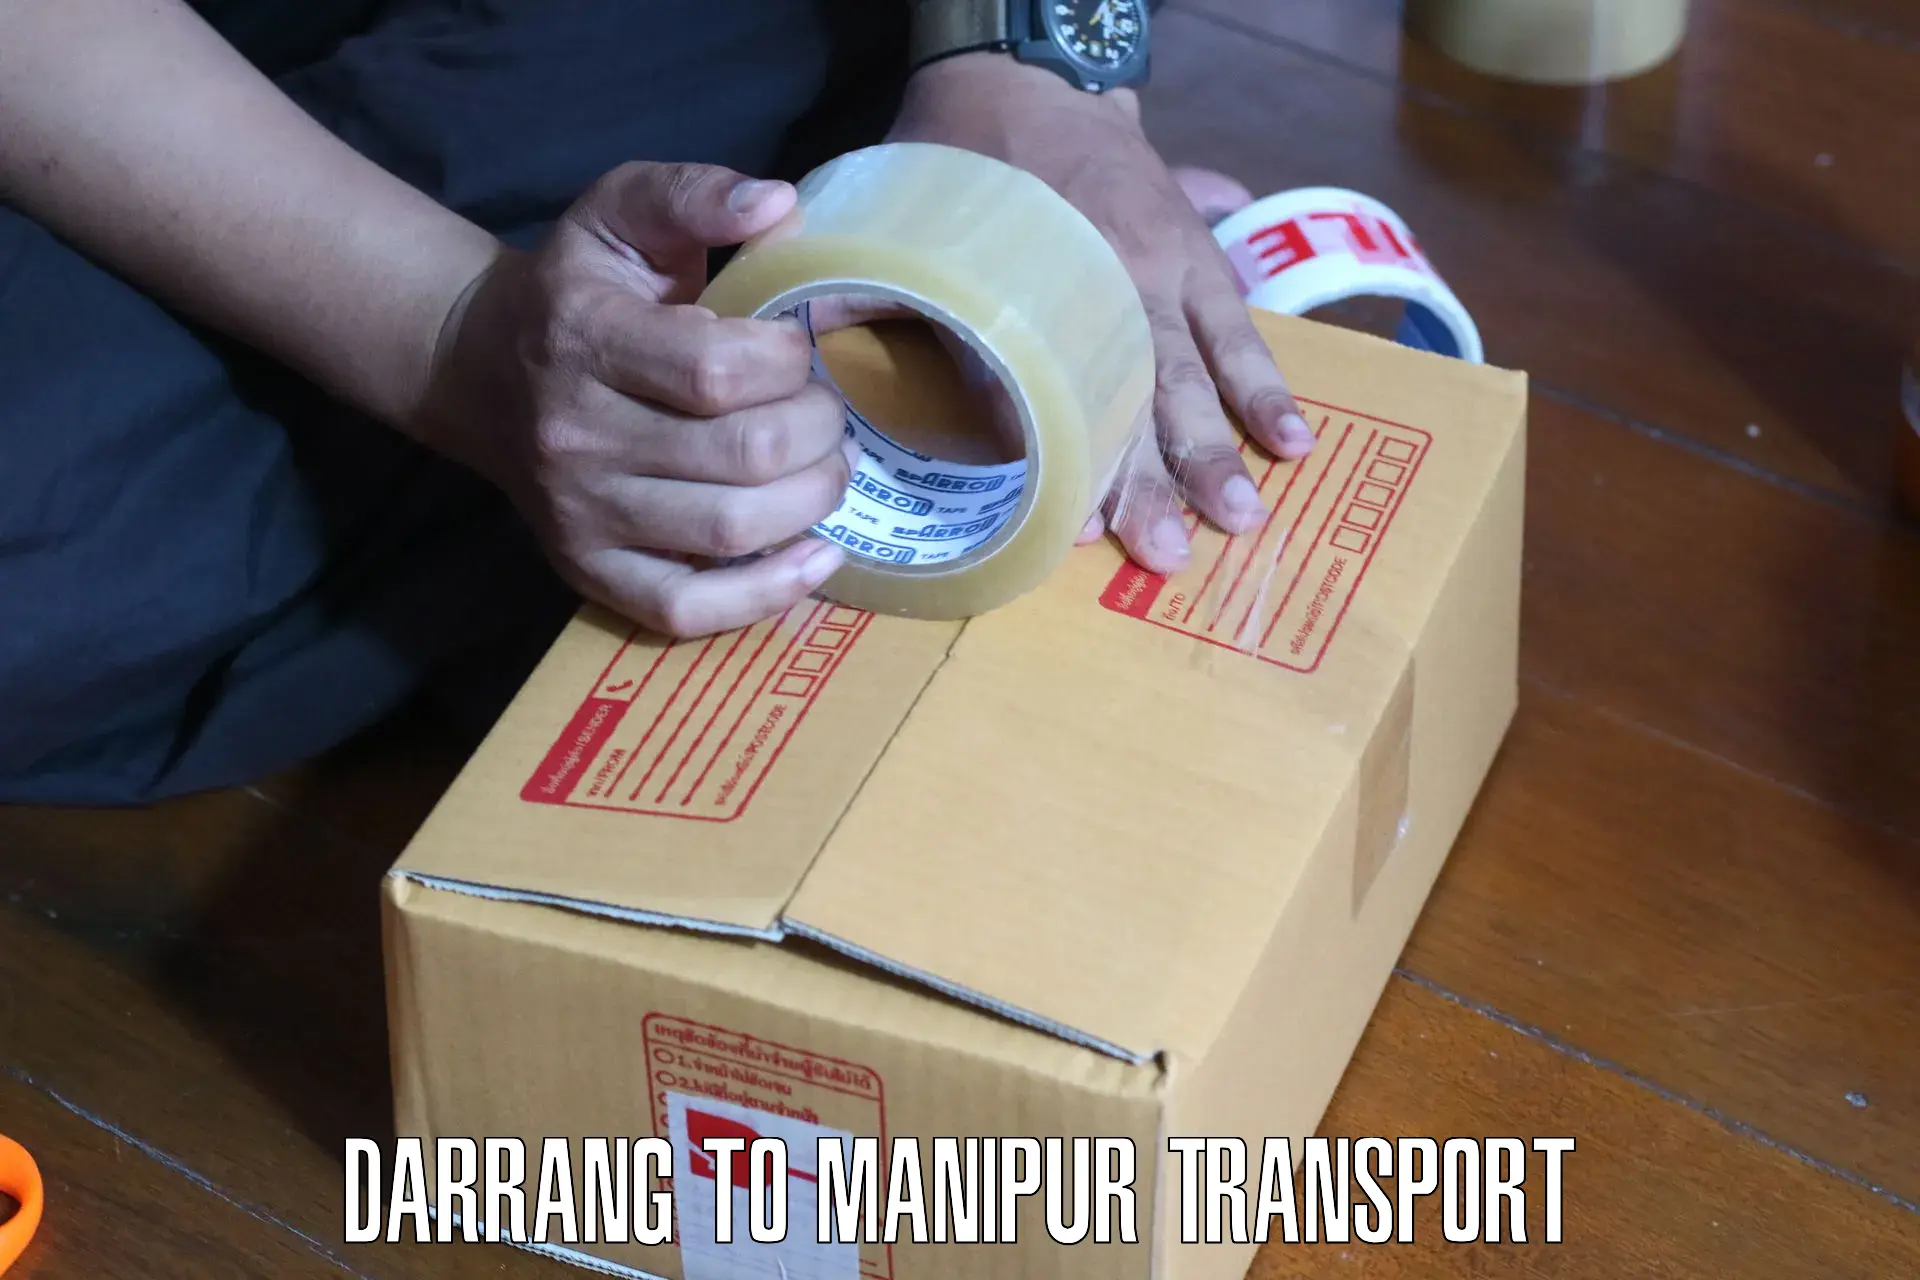 Transport bike from one state to another Darrang to Manipur